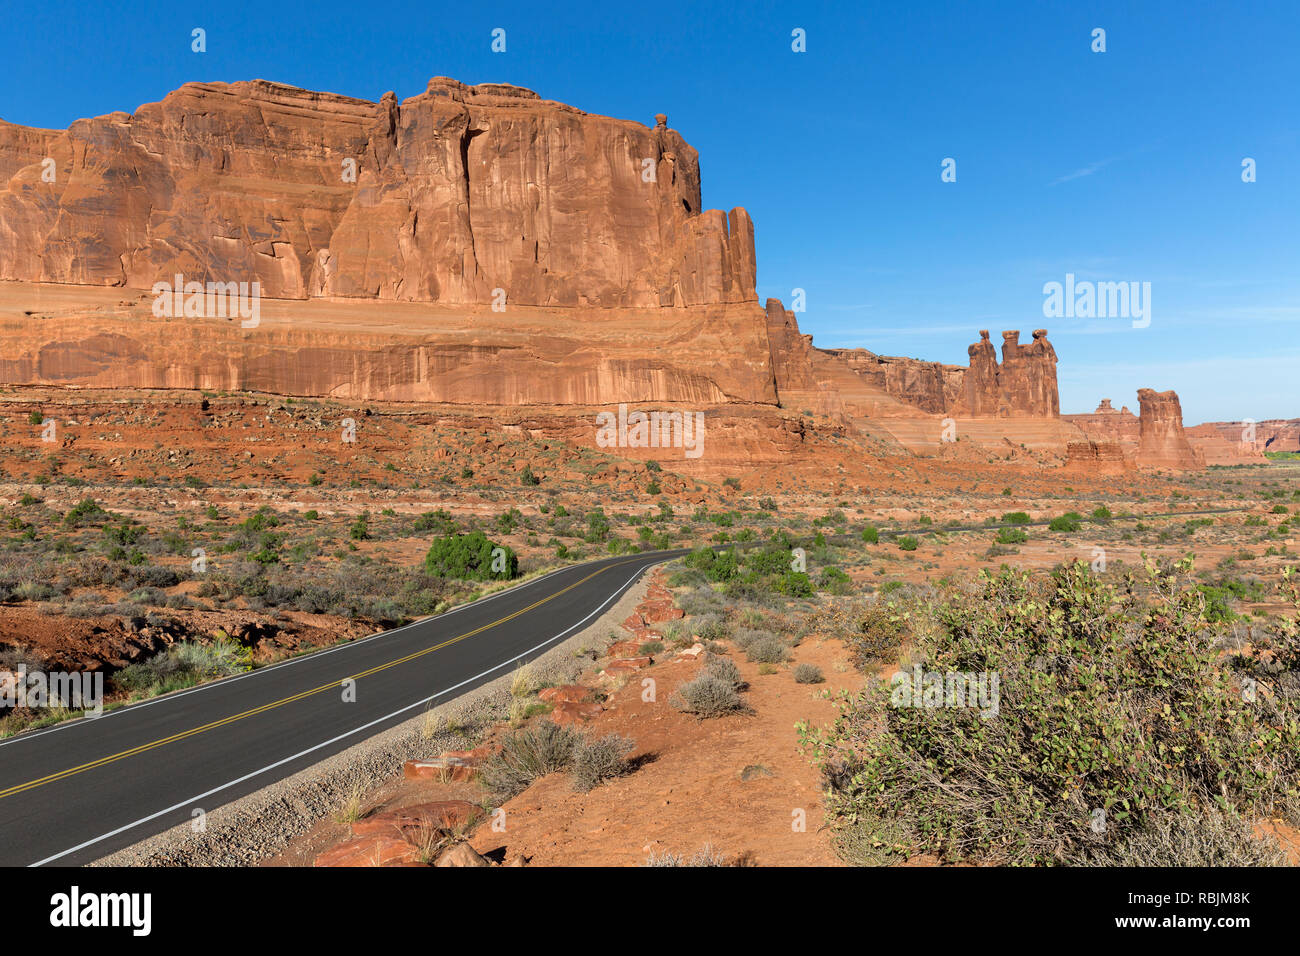 View of road through the Arches National Park in Utah, United States. Stock Photo